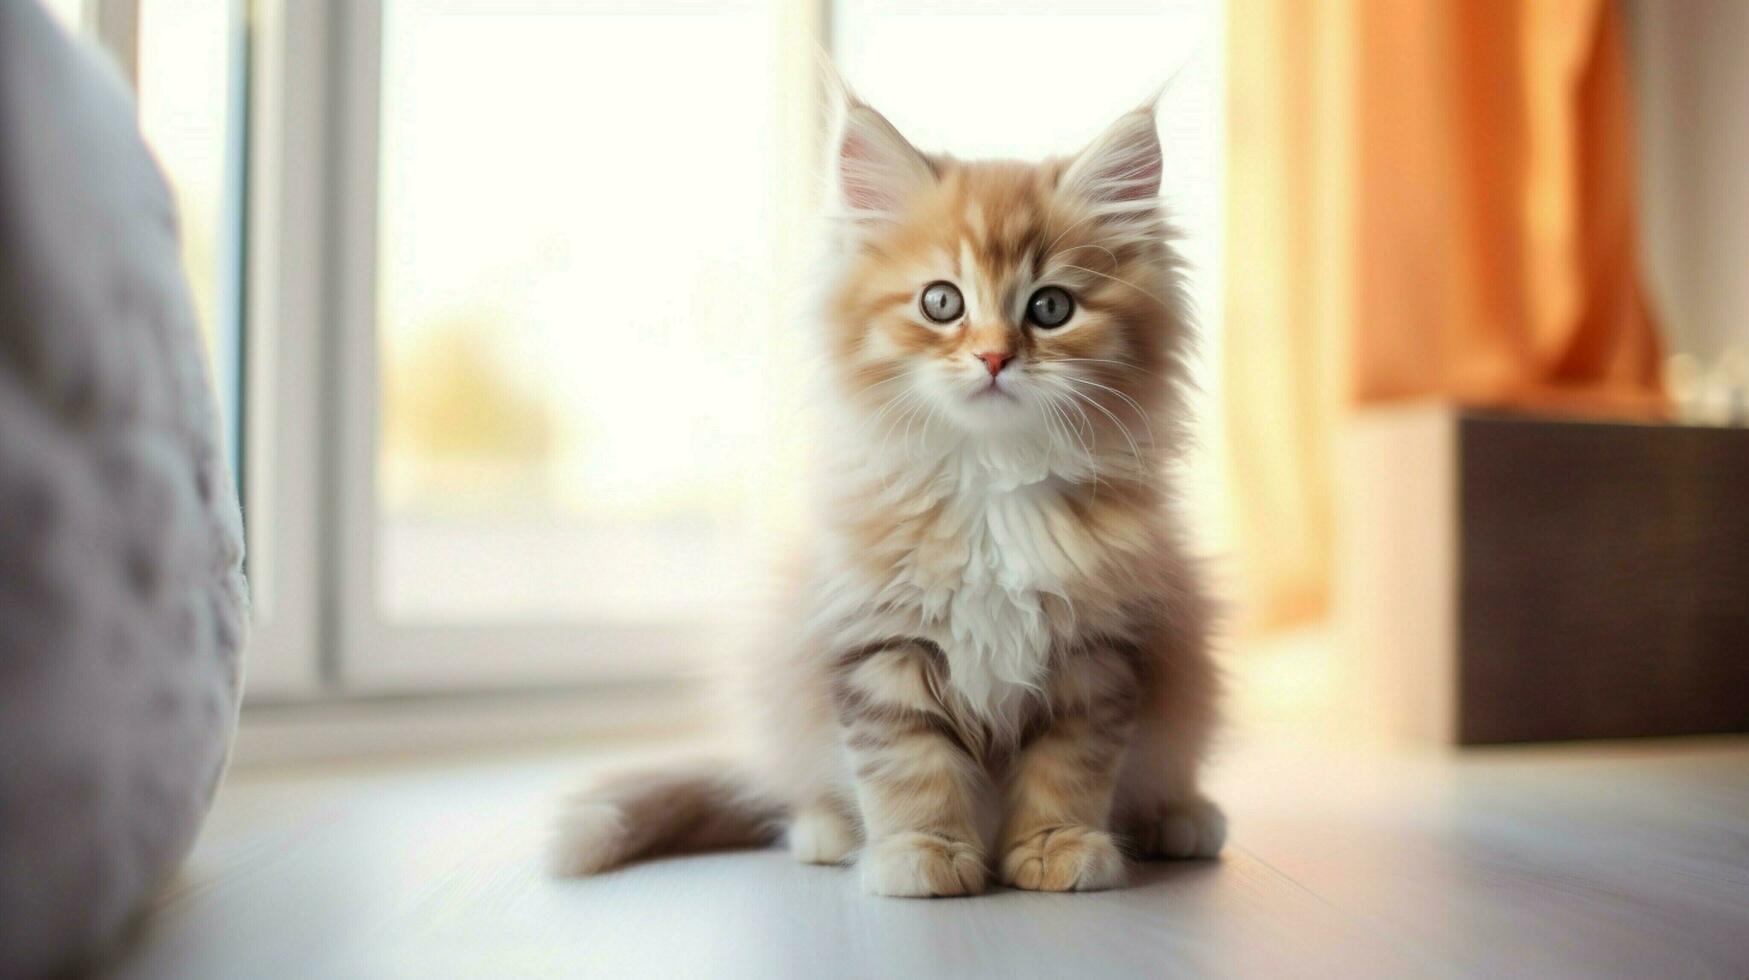 cute kitten with fluffy fur sitting indoors staring photo